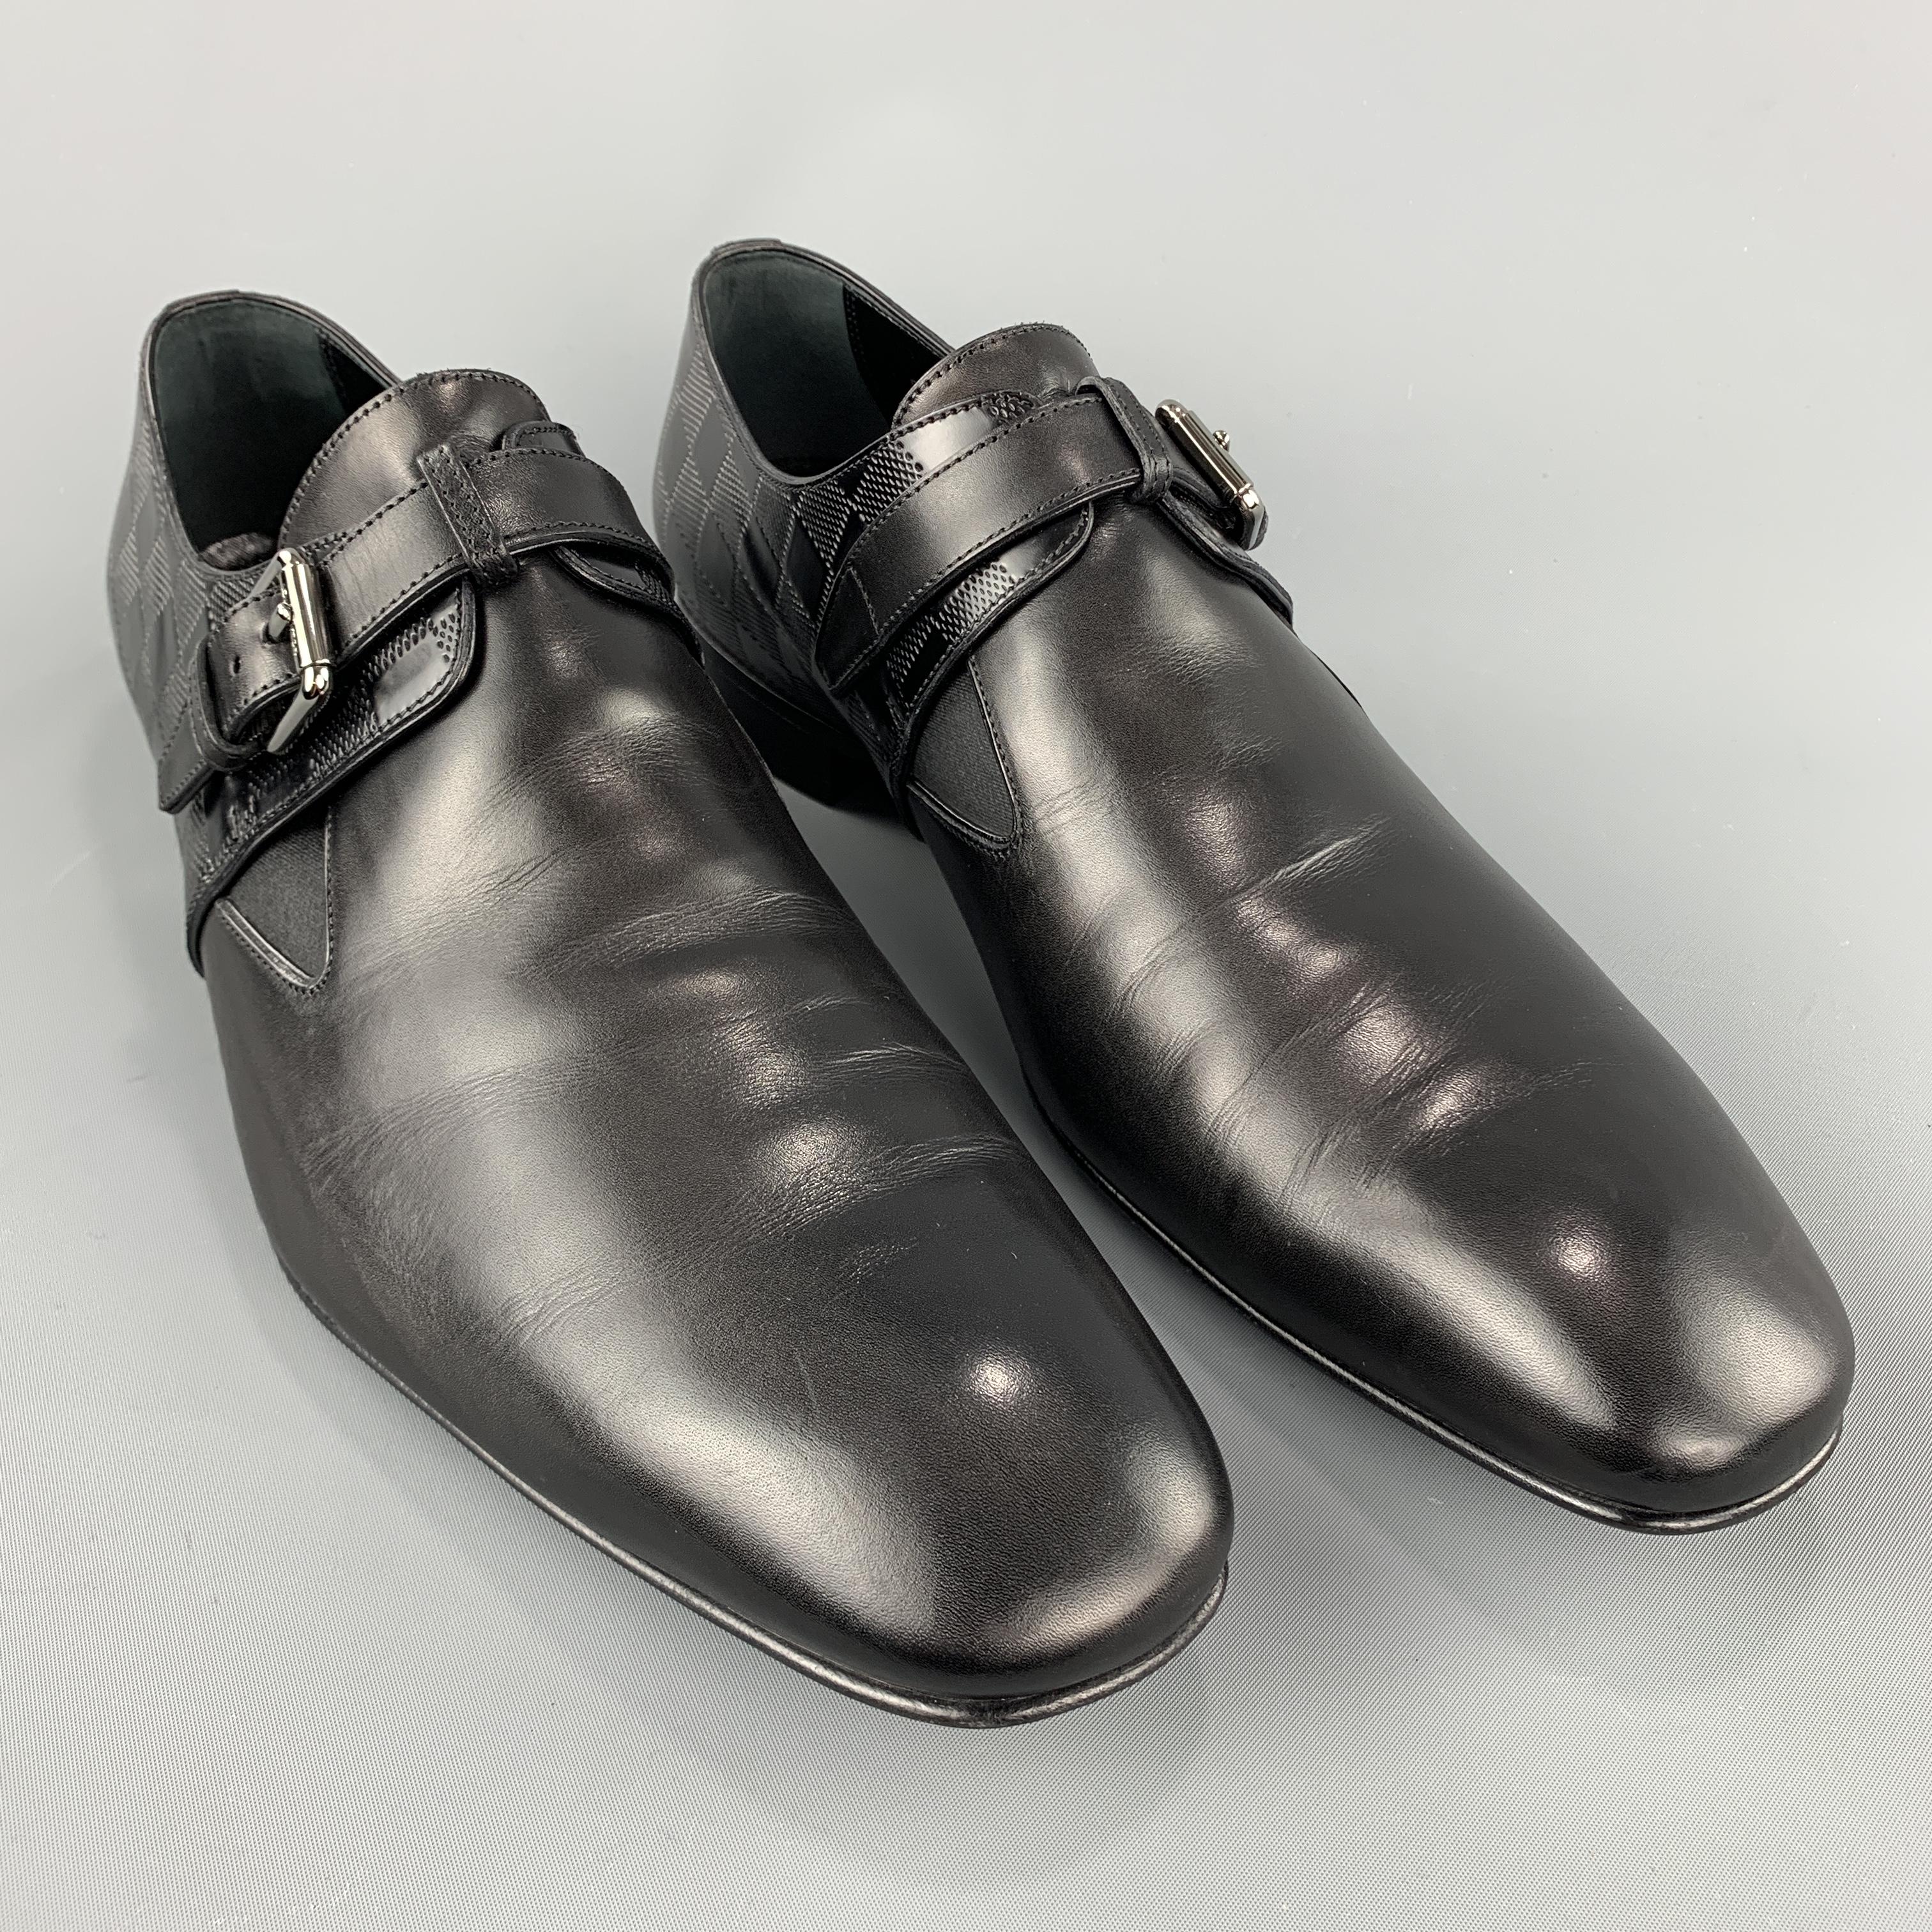 LOUIS VUITTON loafer shoes comes in a black leather featuring a monk strap detail, damier trim, and a wooden heel. Made in Italy.


Marked: 10.5

Outsole: 4 in. x 12.5 in.